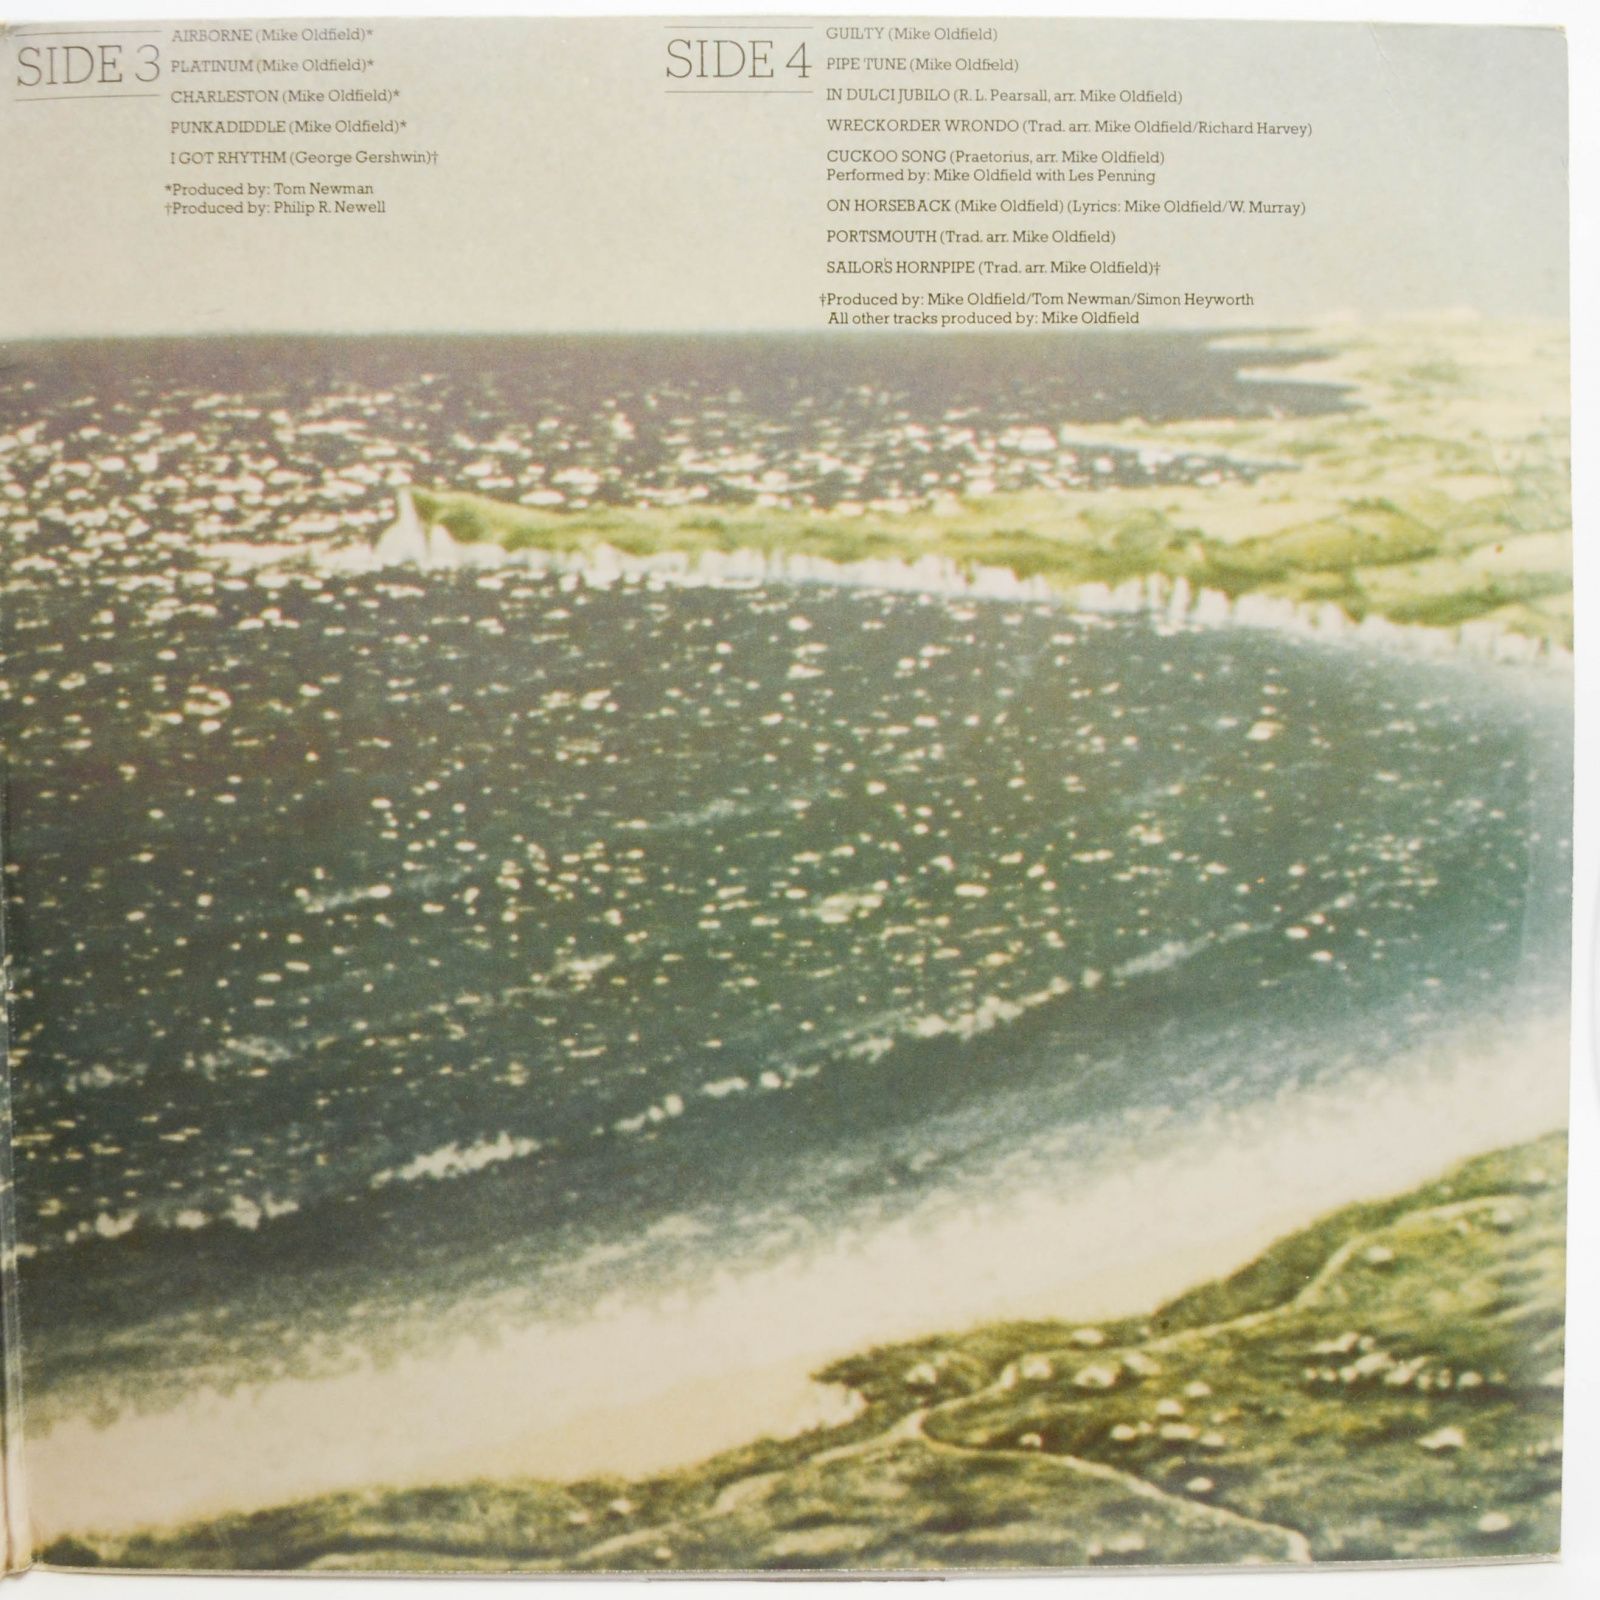 Mike Oldfield — Impressions (2LP, UK), 1980